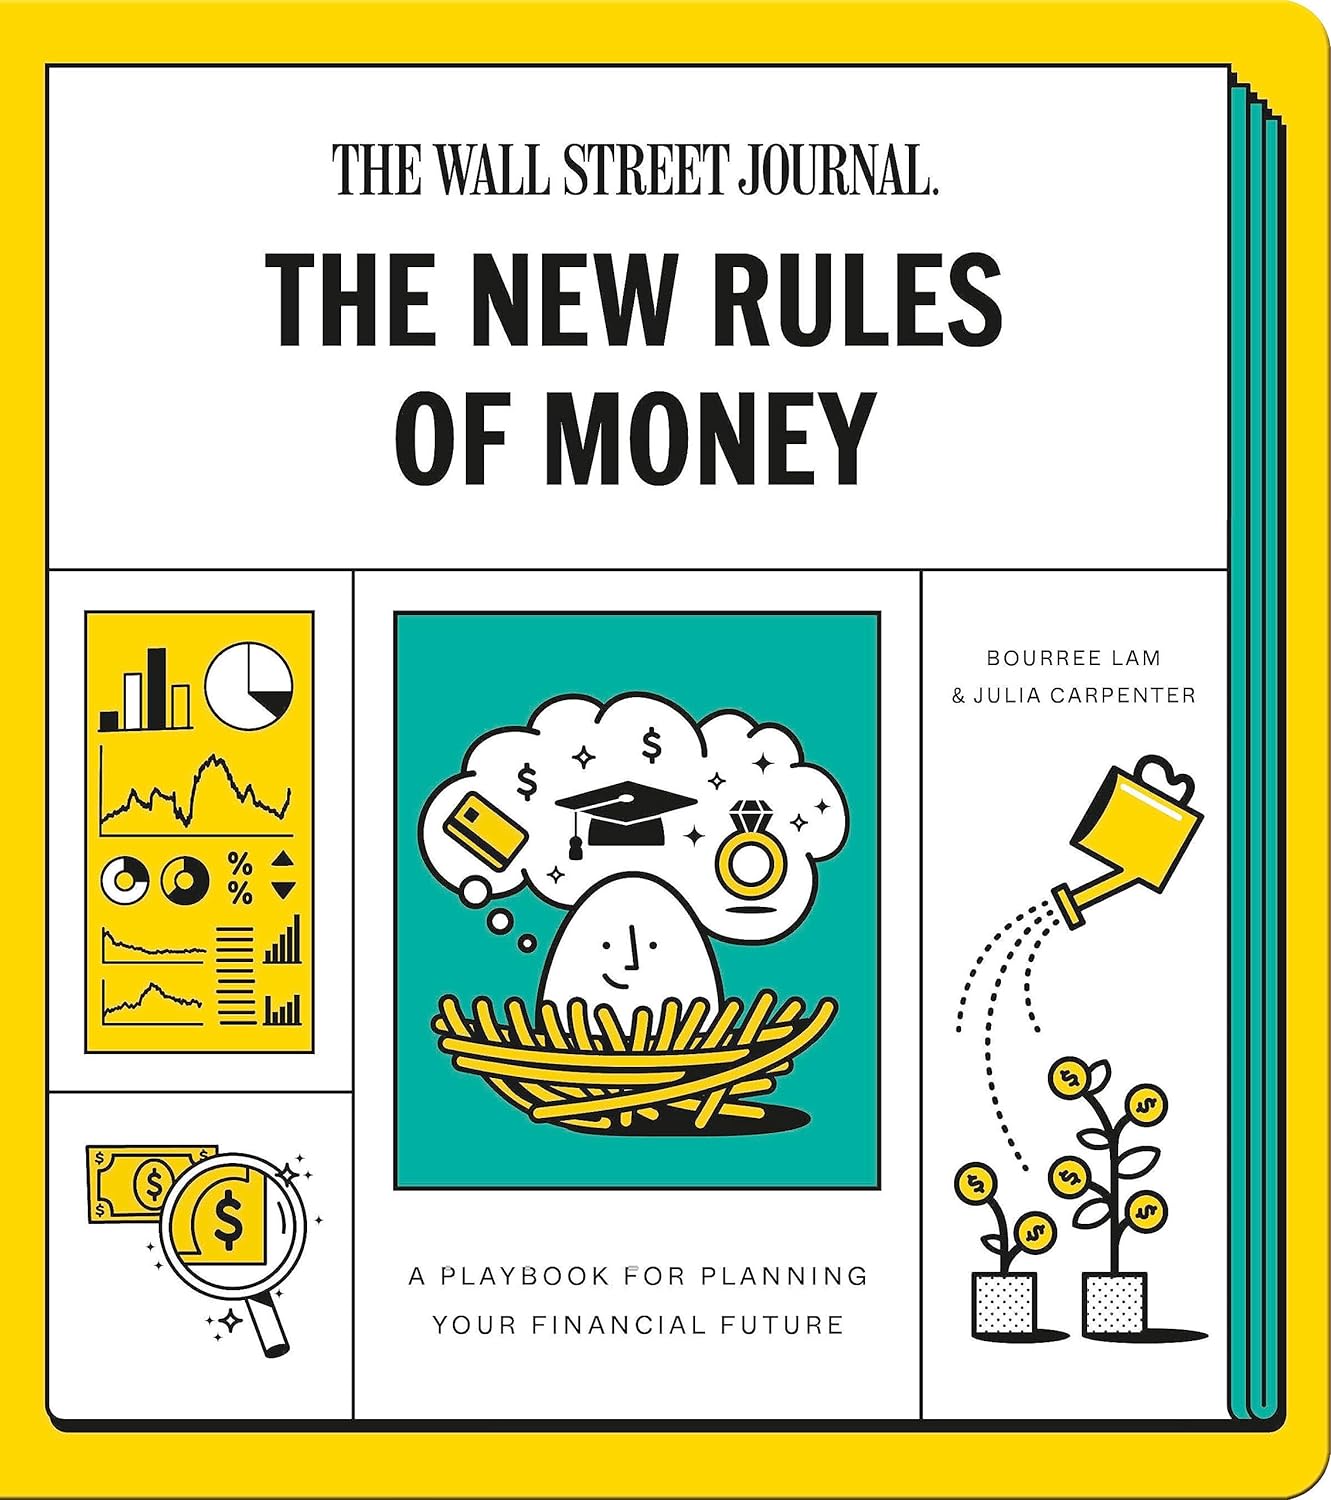 The New Rules of Money A Playbook for Planning Your Financial Future A Workbook - SureShot Books Publishing LLC